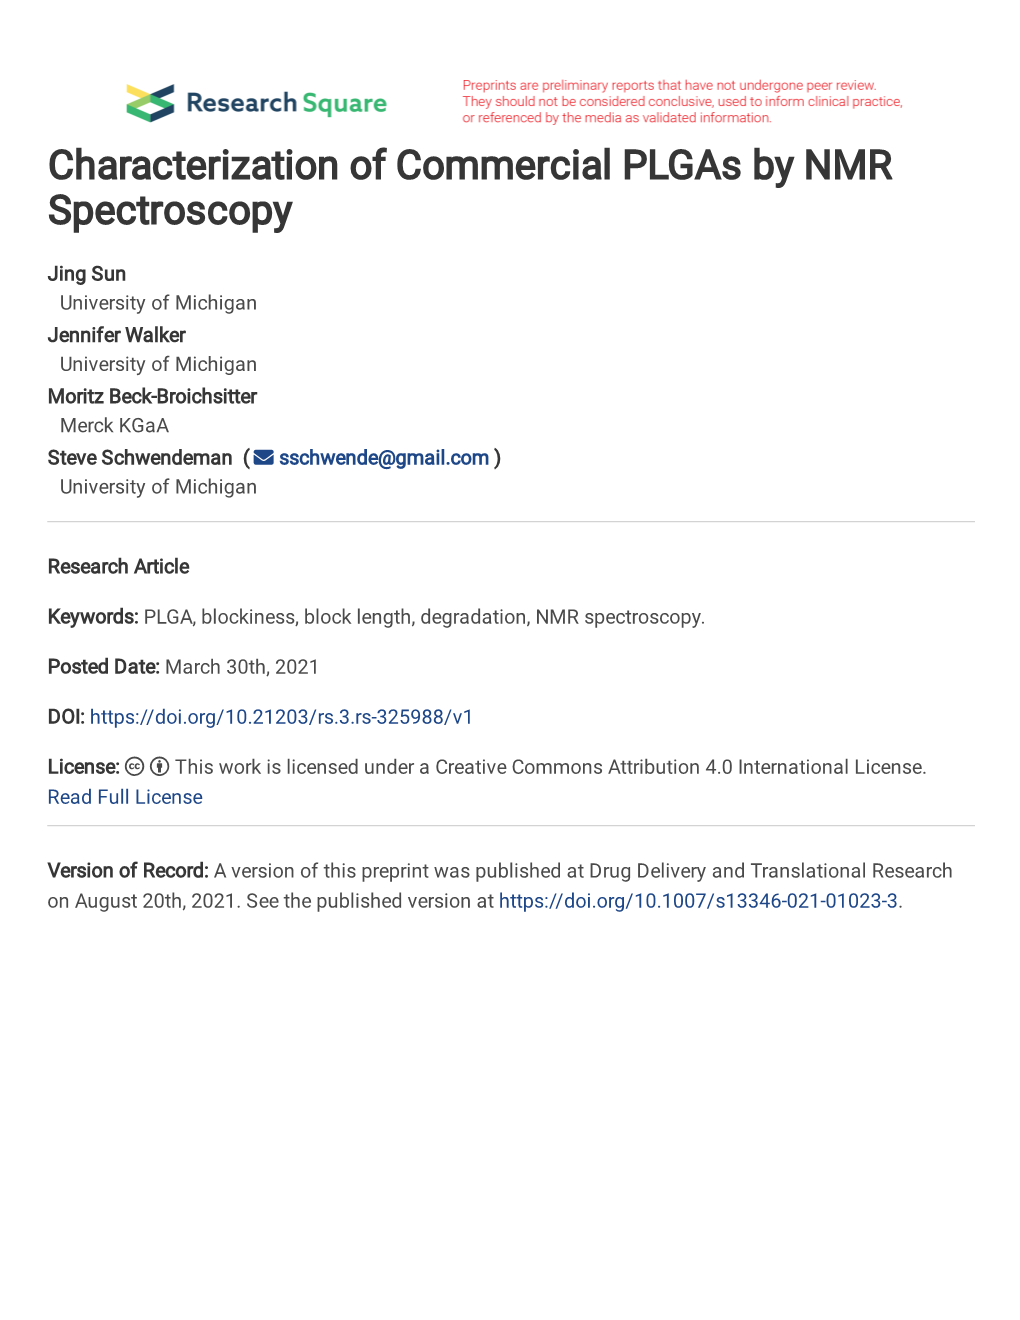 Characterization of Commercial Plgas by NMR Spectroscopy